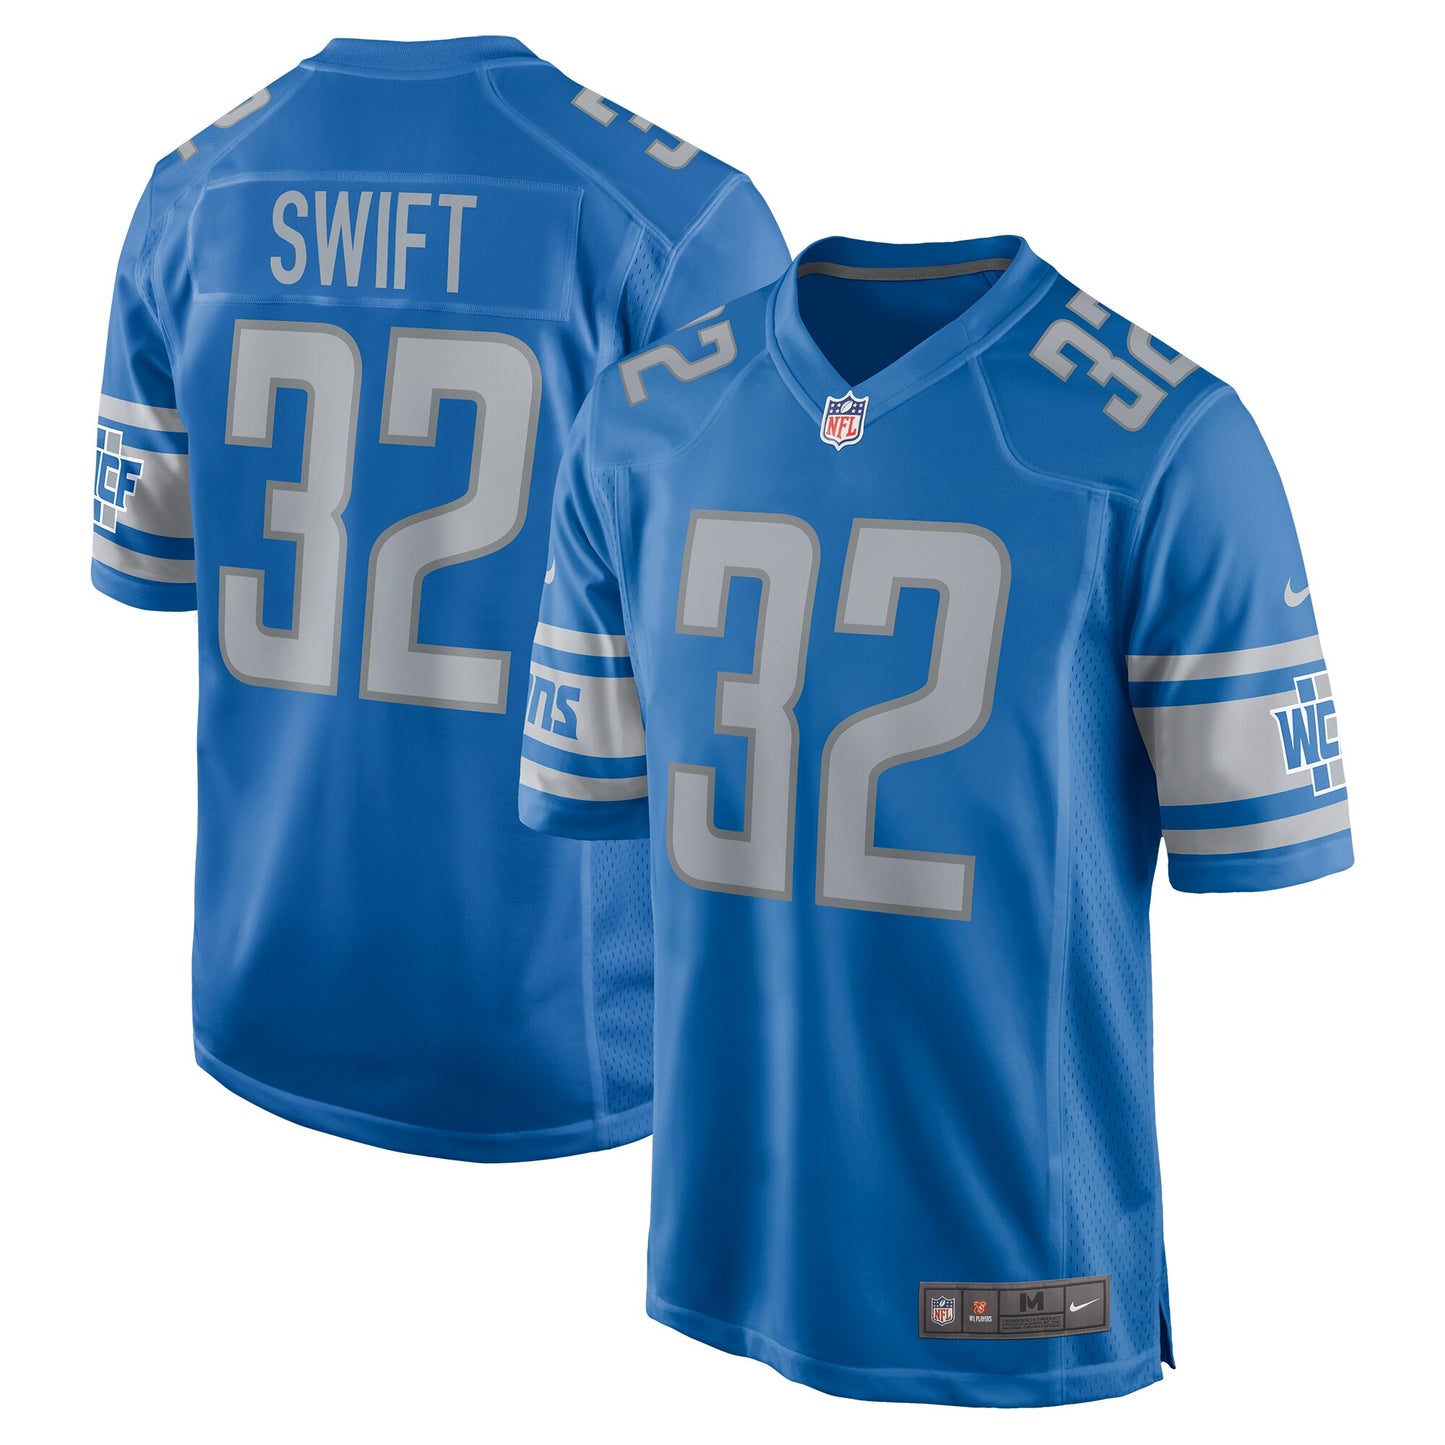 D'Andre Swift Detroit Lions Nike Game Jersey - Blue